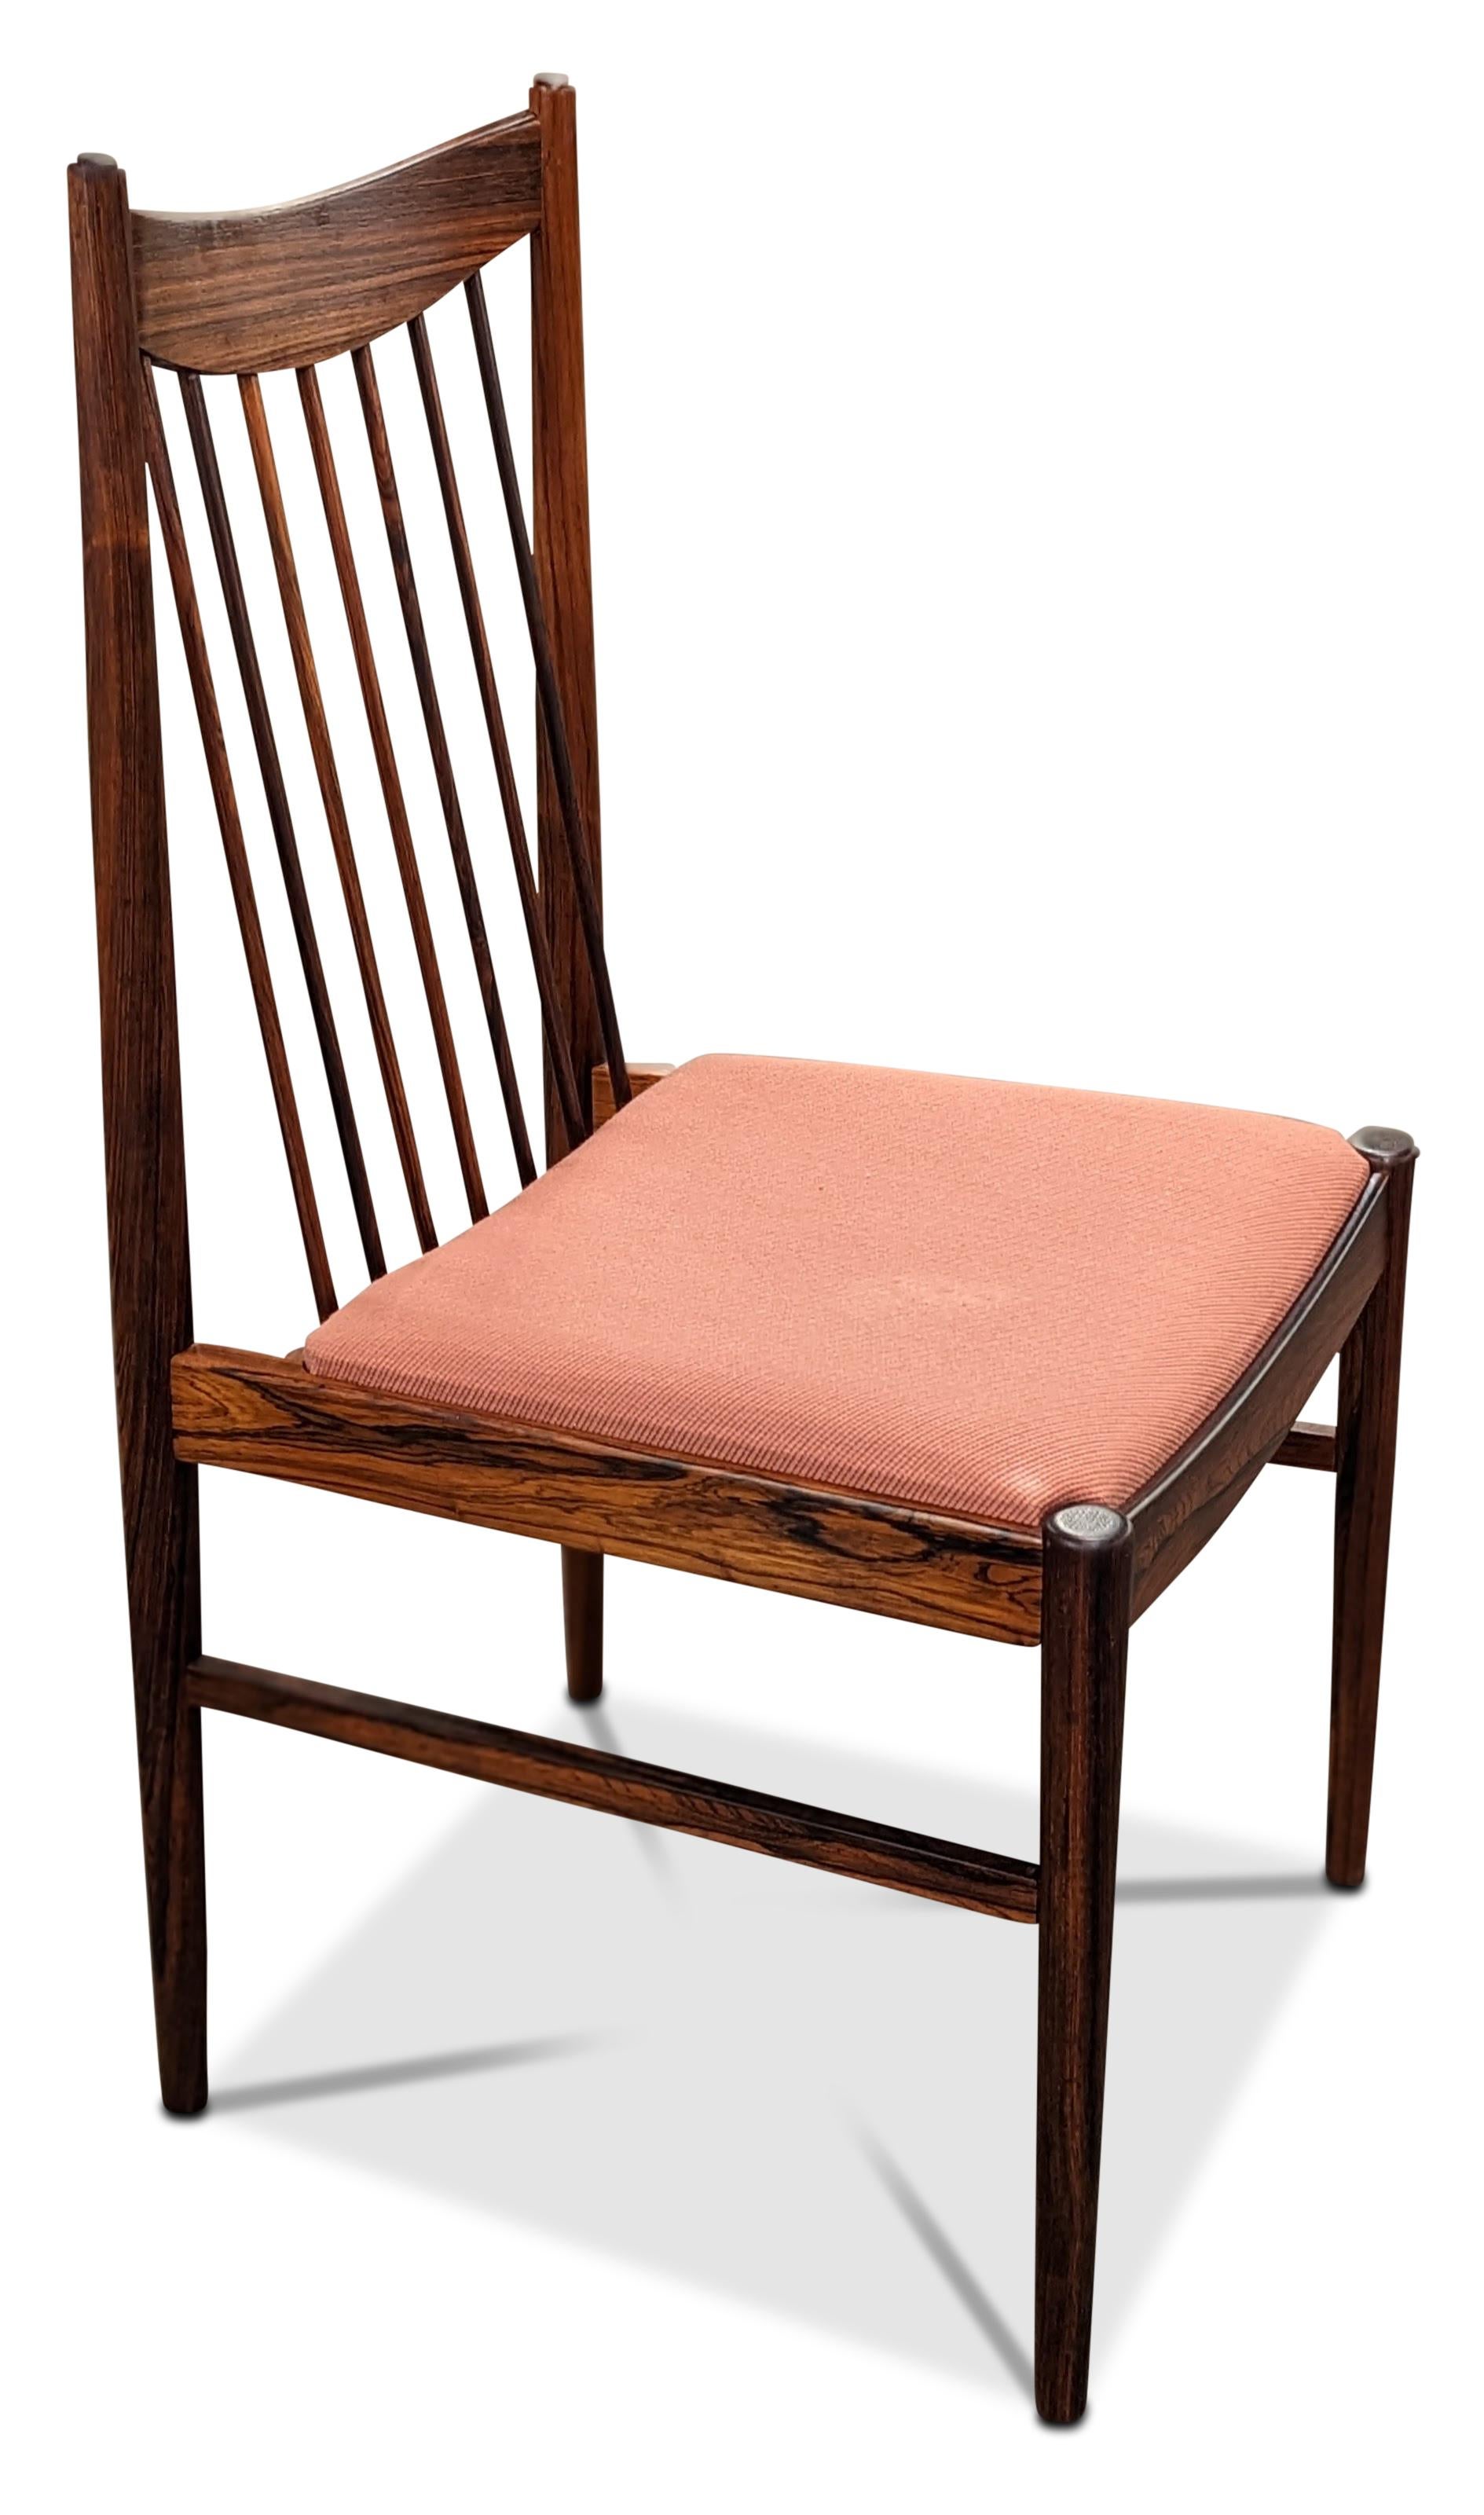 4 Arne Vodder / Sibast Rosewood Chair, 012323 Vintage Danish Midcentury In Good Condition For Sale In Jersey City, NJ